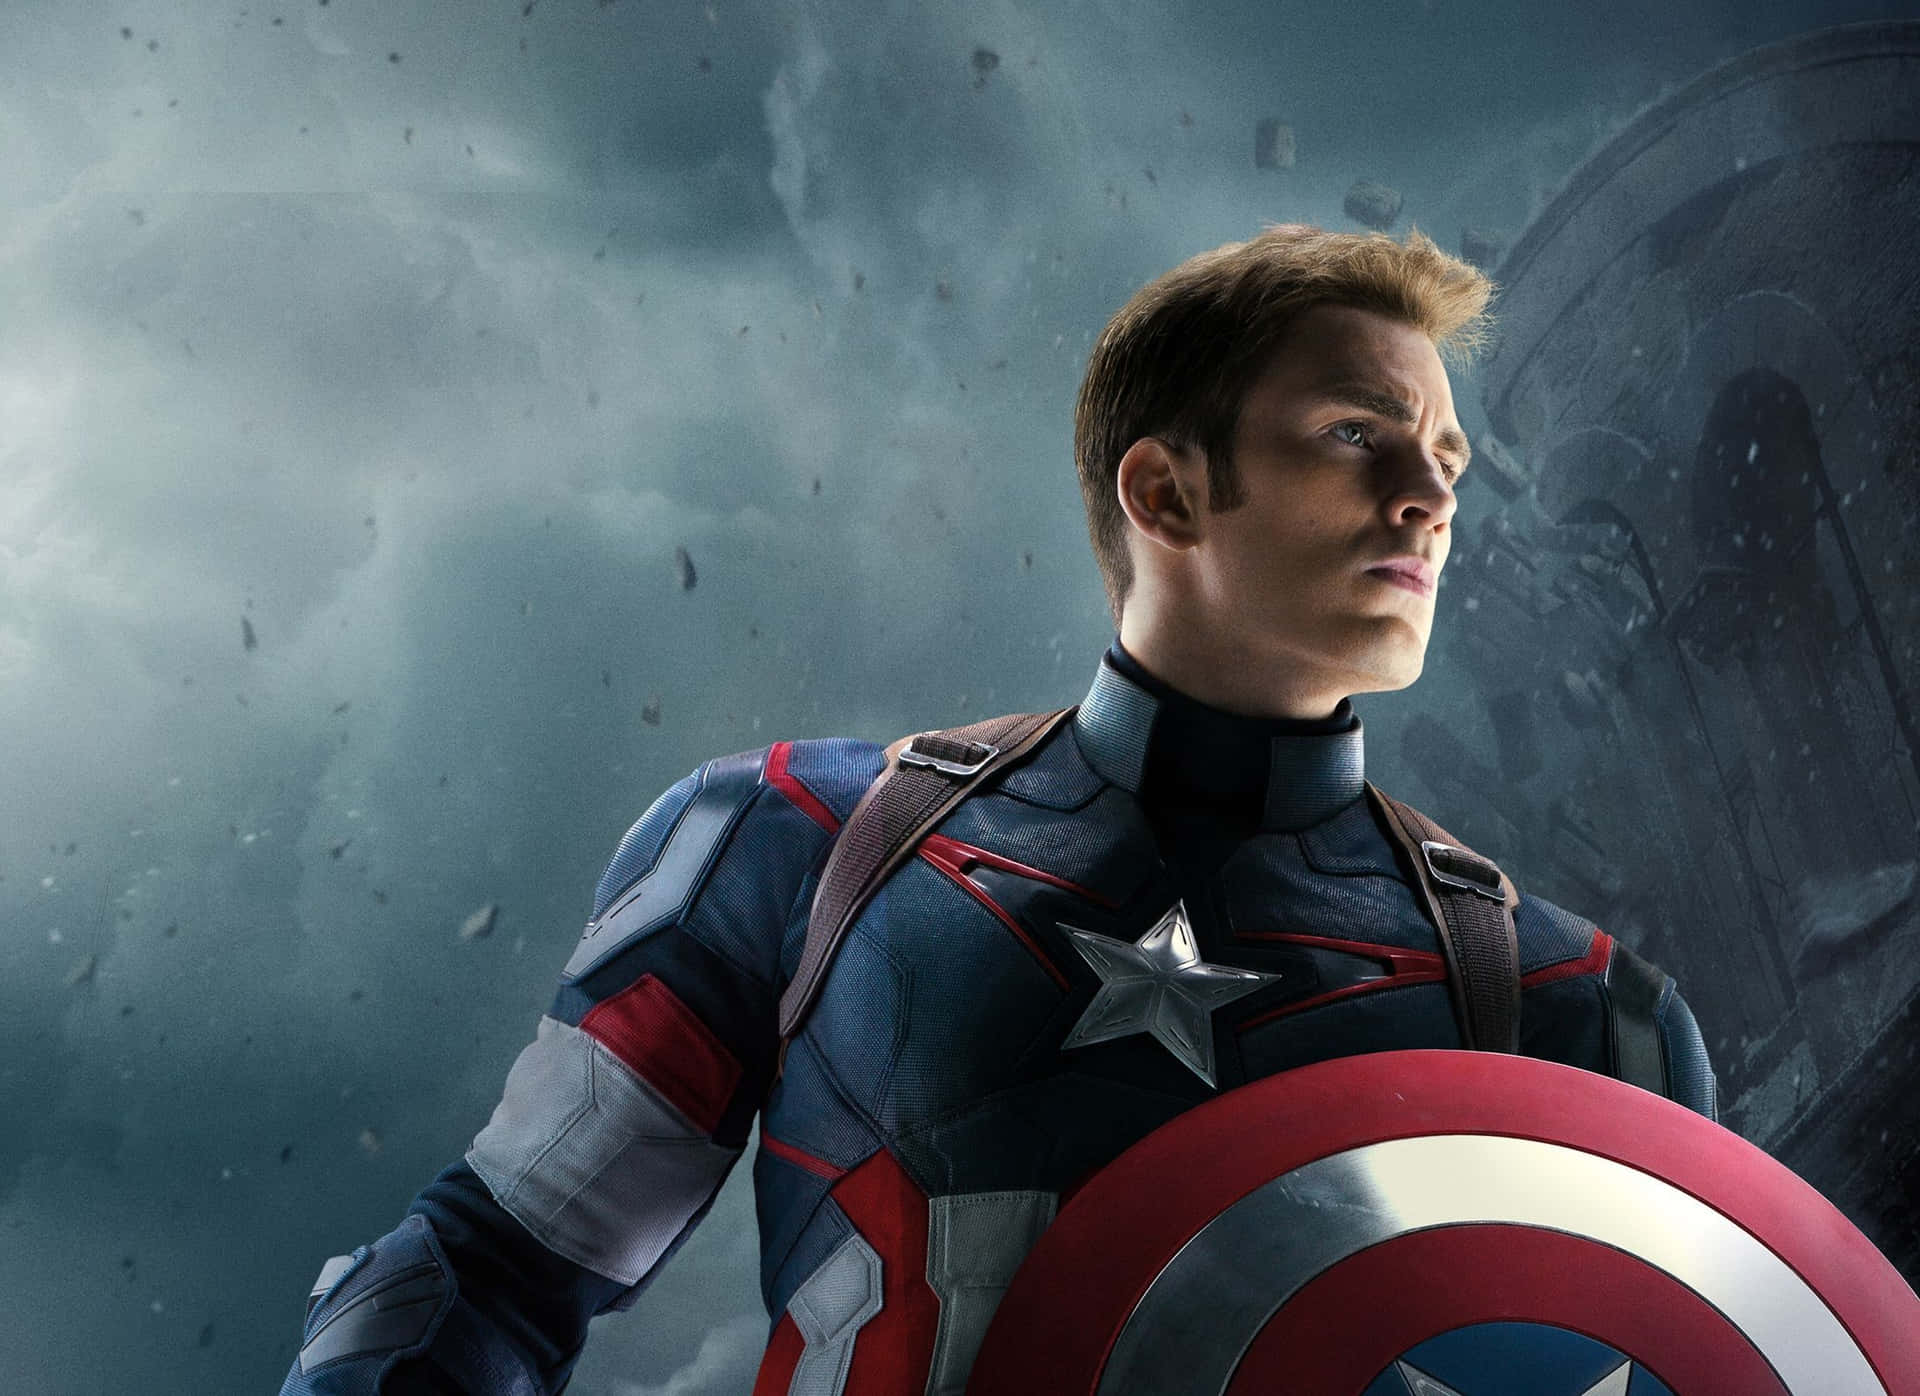 "The Best of the Best - Captain America"